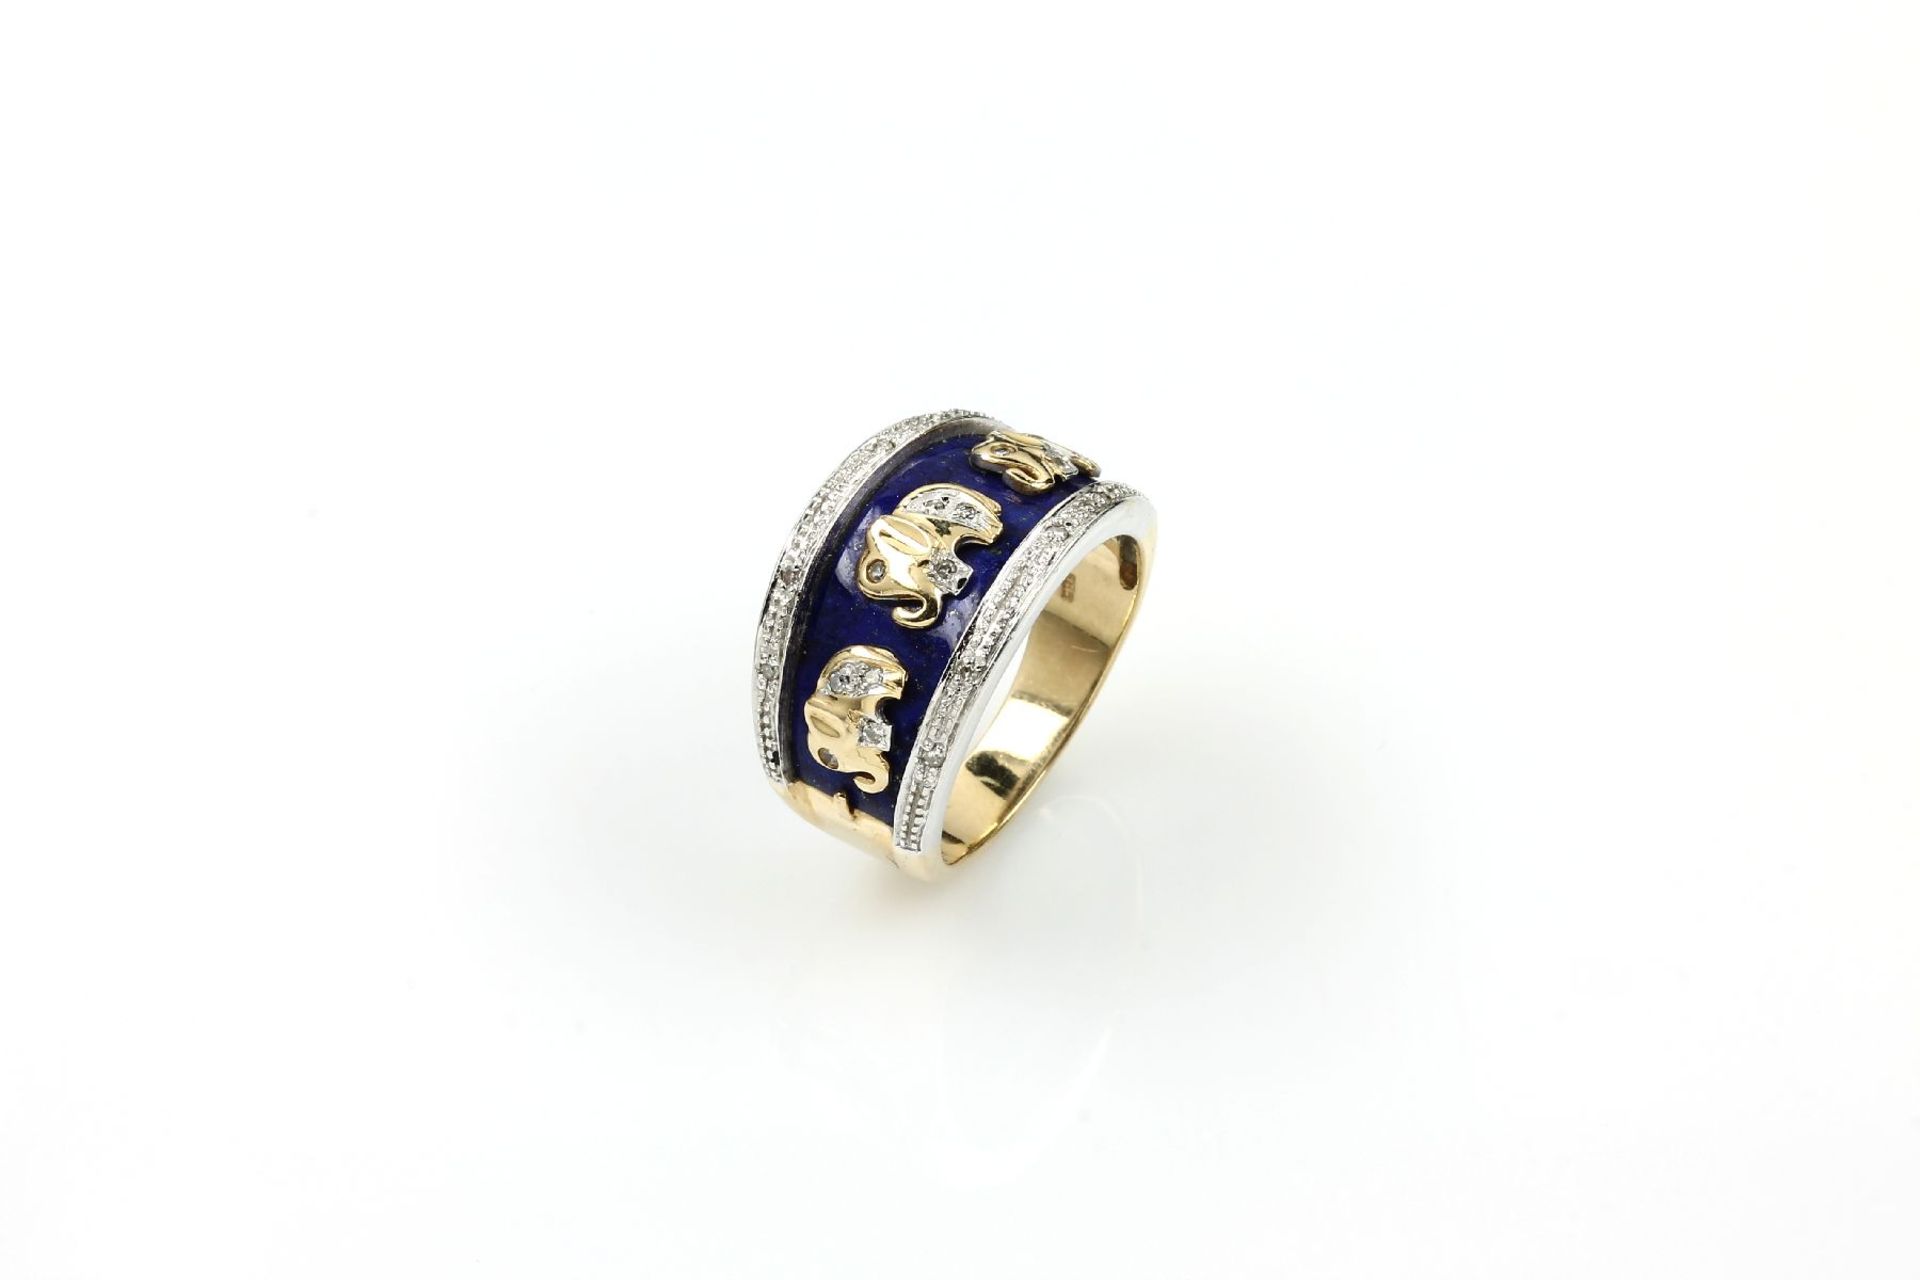 14 kt gold ring "elephants" with enamel and diamonds , YG/WG 585/000, partial blue enameled, 20 8/